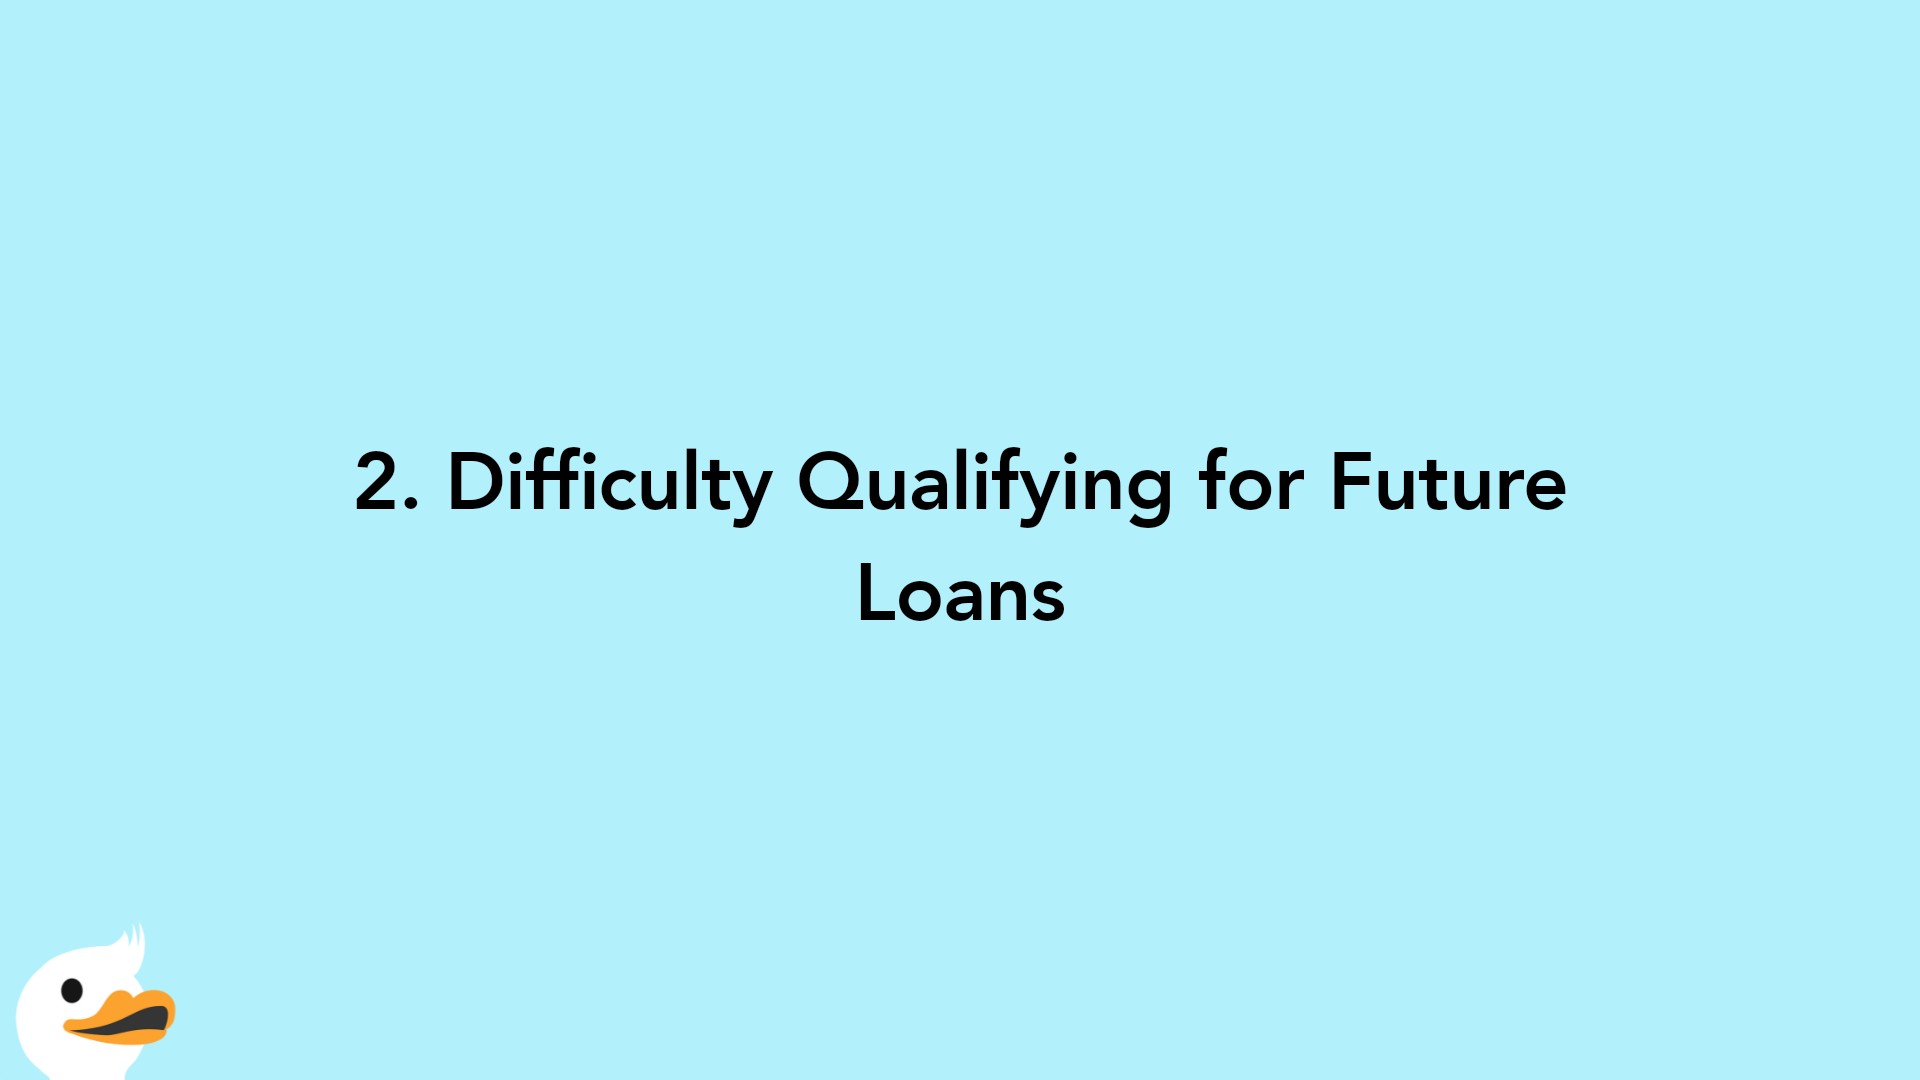 2. Difficulty Qualifying for Future Loans